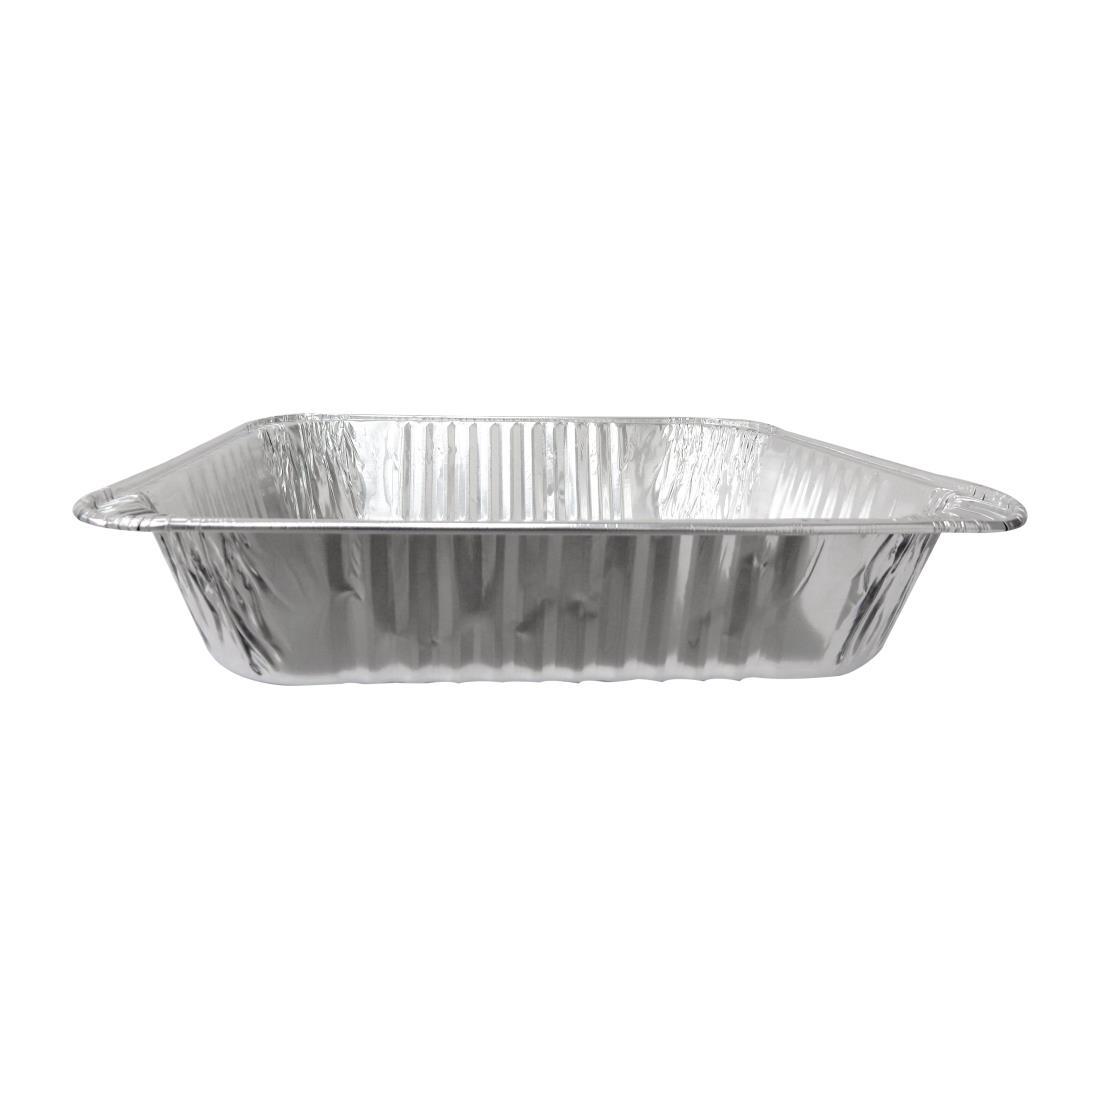 Shallow Foil Containers (Pack of 200) - FJ854  - 2